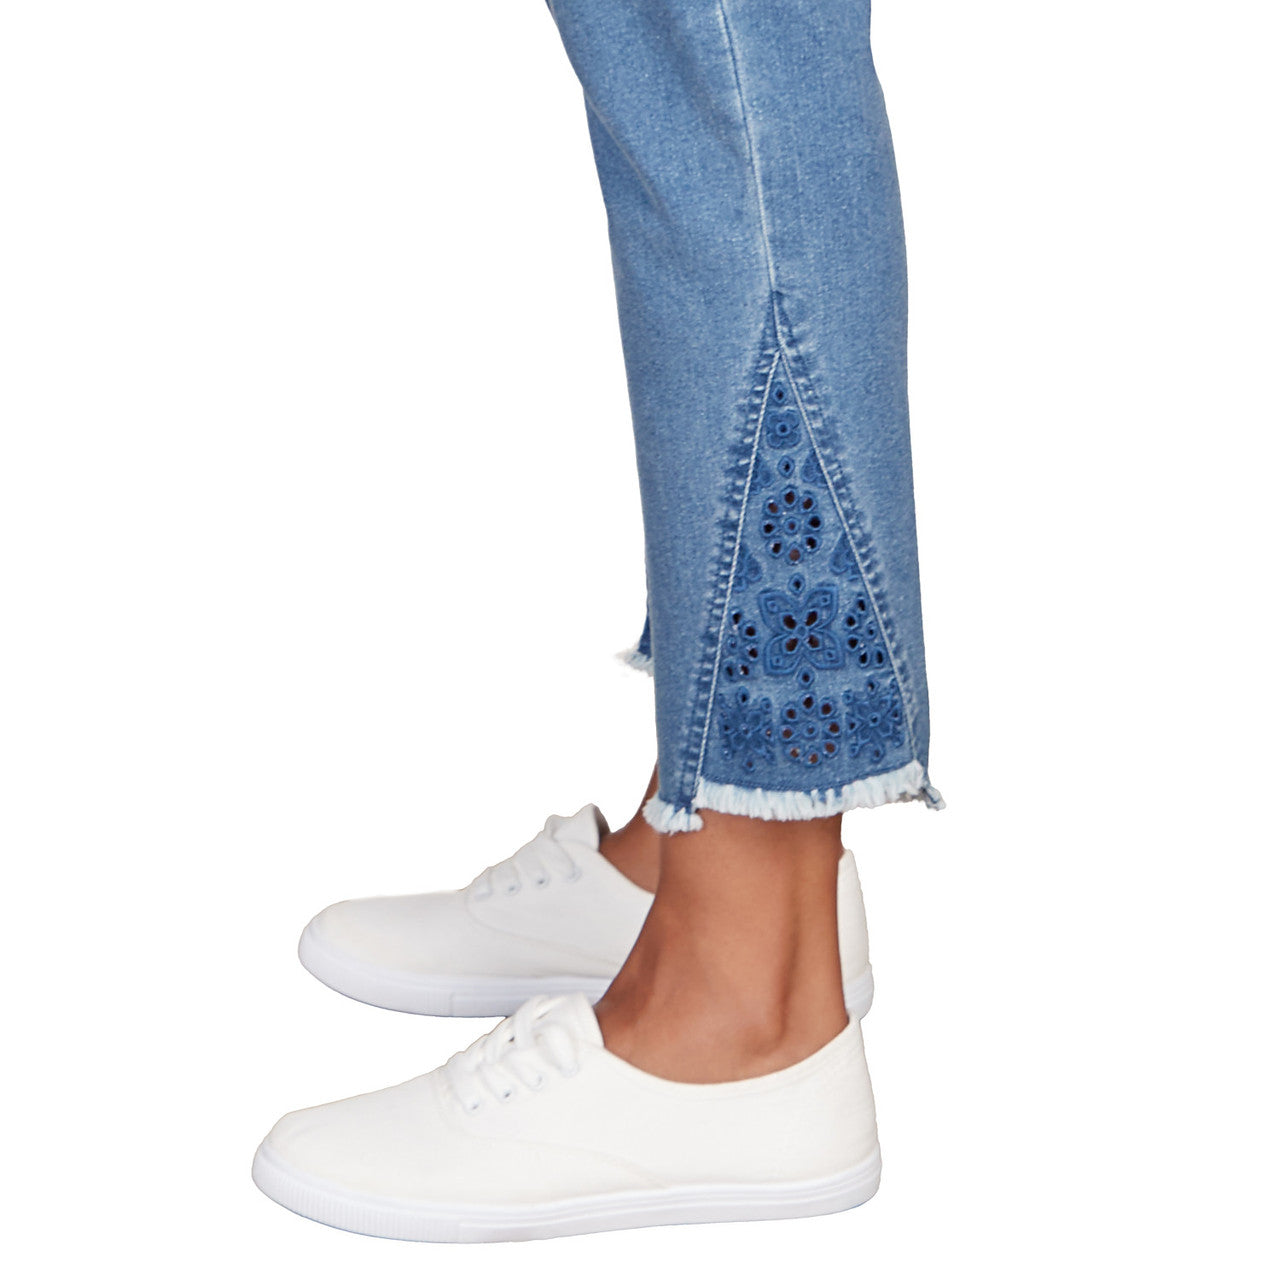 036- Ruby Road Embroidered Ankle Pull On Stretch Denim Jeans